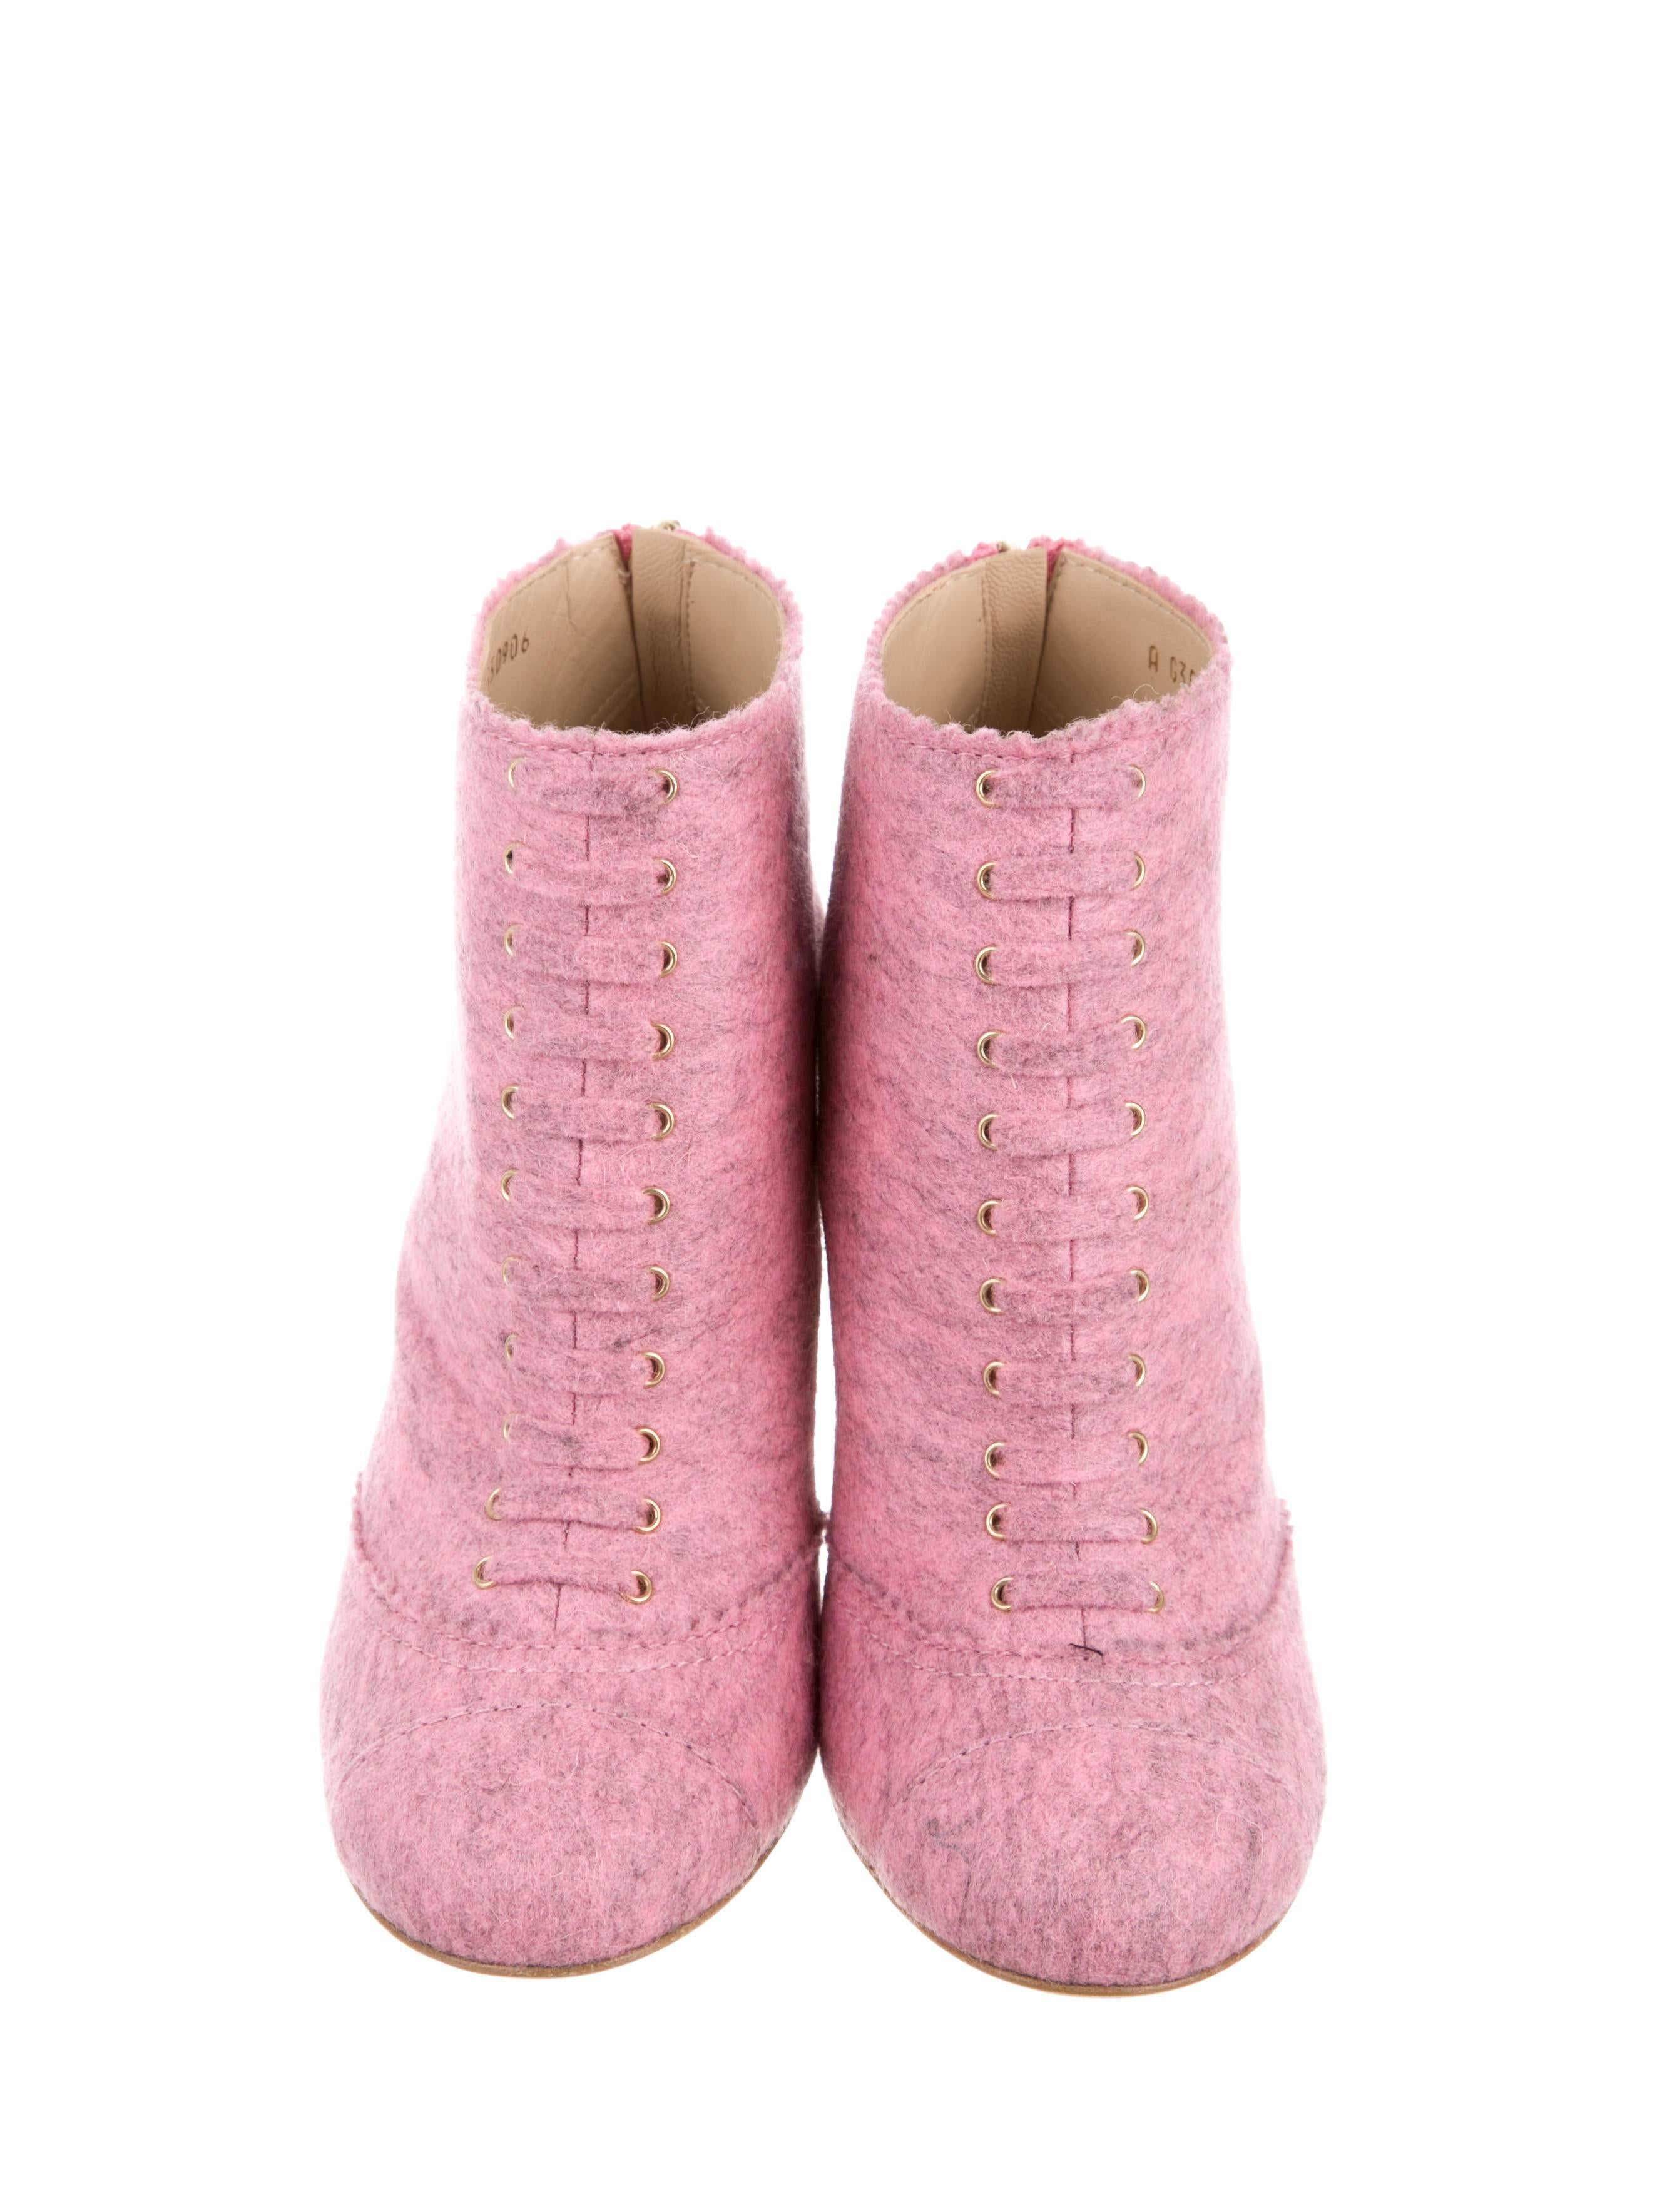 CHANEL FELT ROUND-TOE BOOTIES

Spring has sprung! Brand new and SOLD OUT pink mélange felt Chanel round-toe booties with gold-tone stacked heels. 

Size IT 36.5 (US 6.5)
Melange felt
Gold tone heel
Lace up detail
Zip closure
Heel height